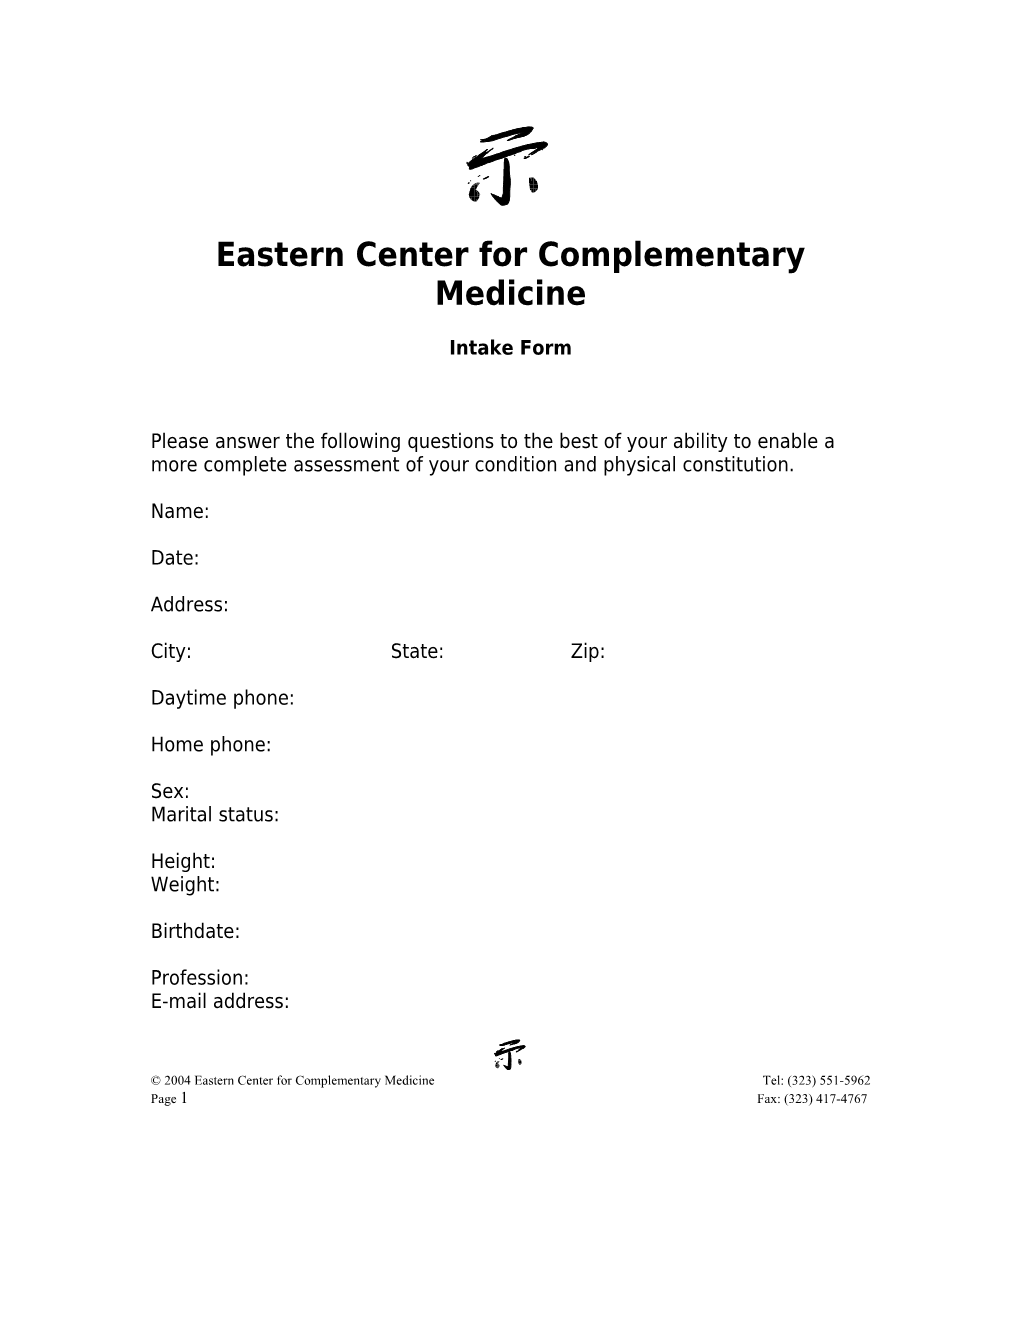 Eastern Center for Complementary Medicine